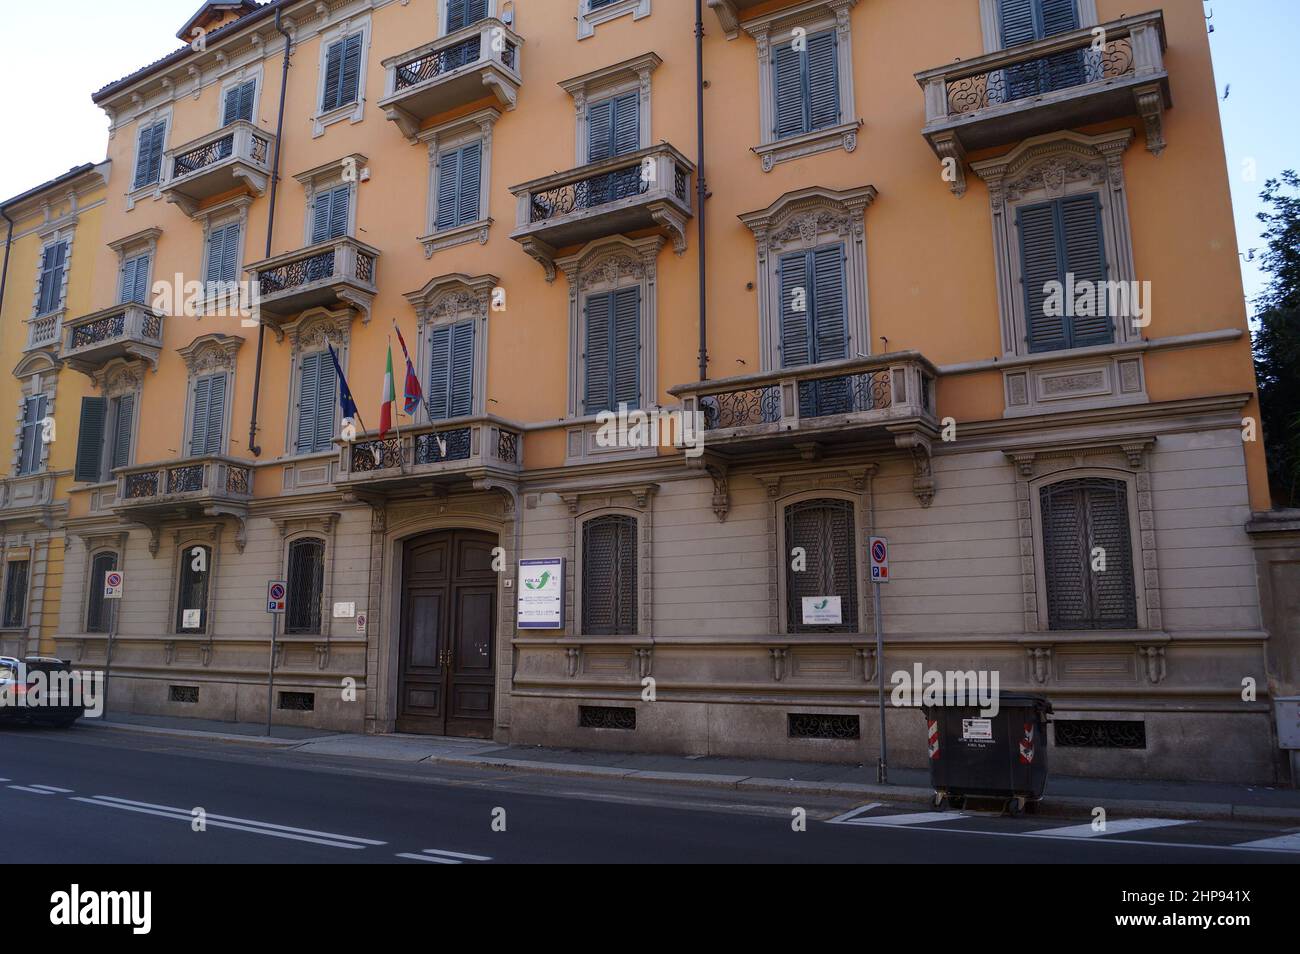 Alessandria (Piedmont, Italy): facade of an historic palace in the city centre Stock Photo